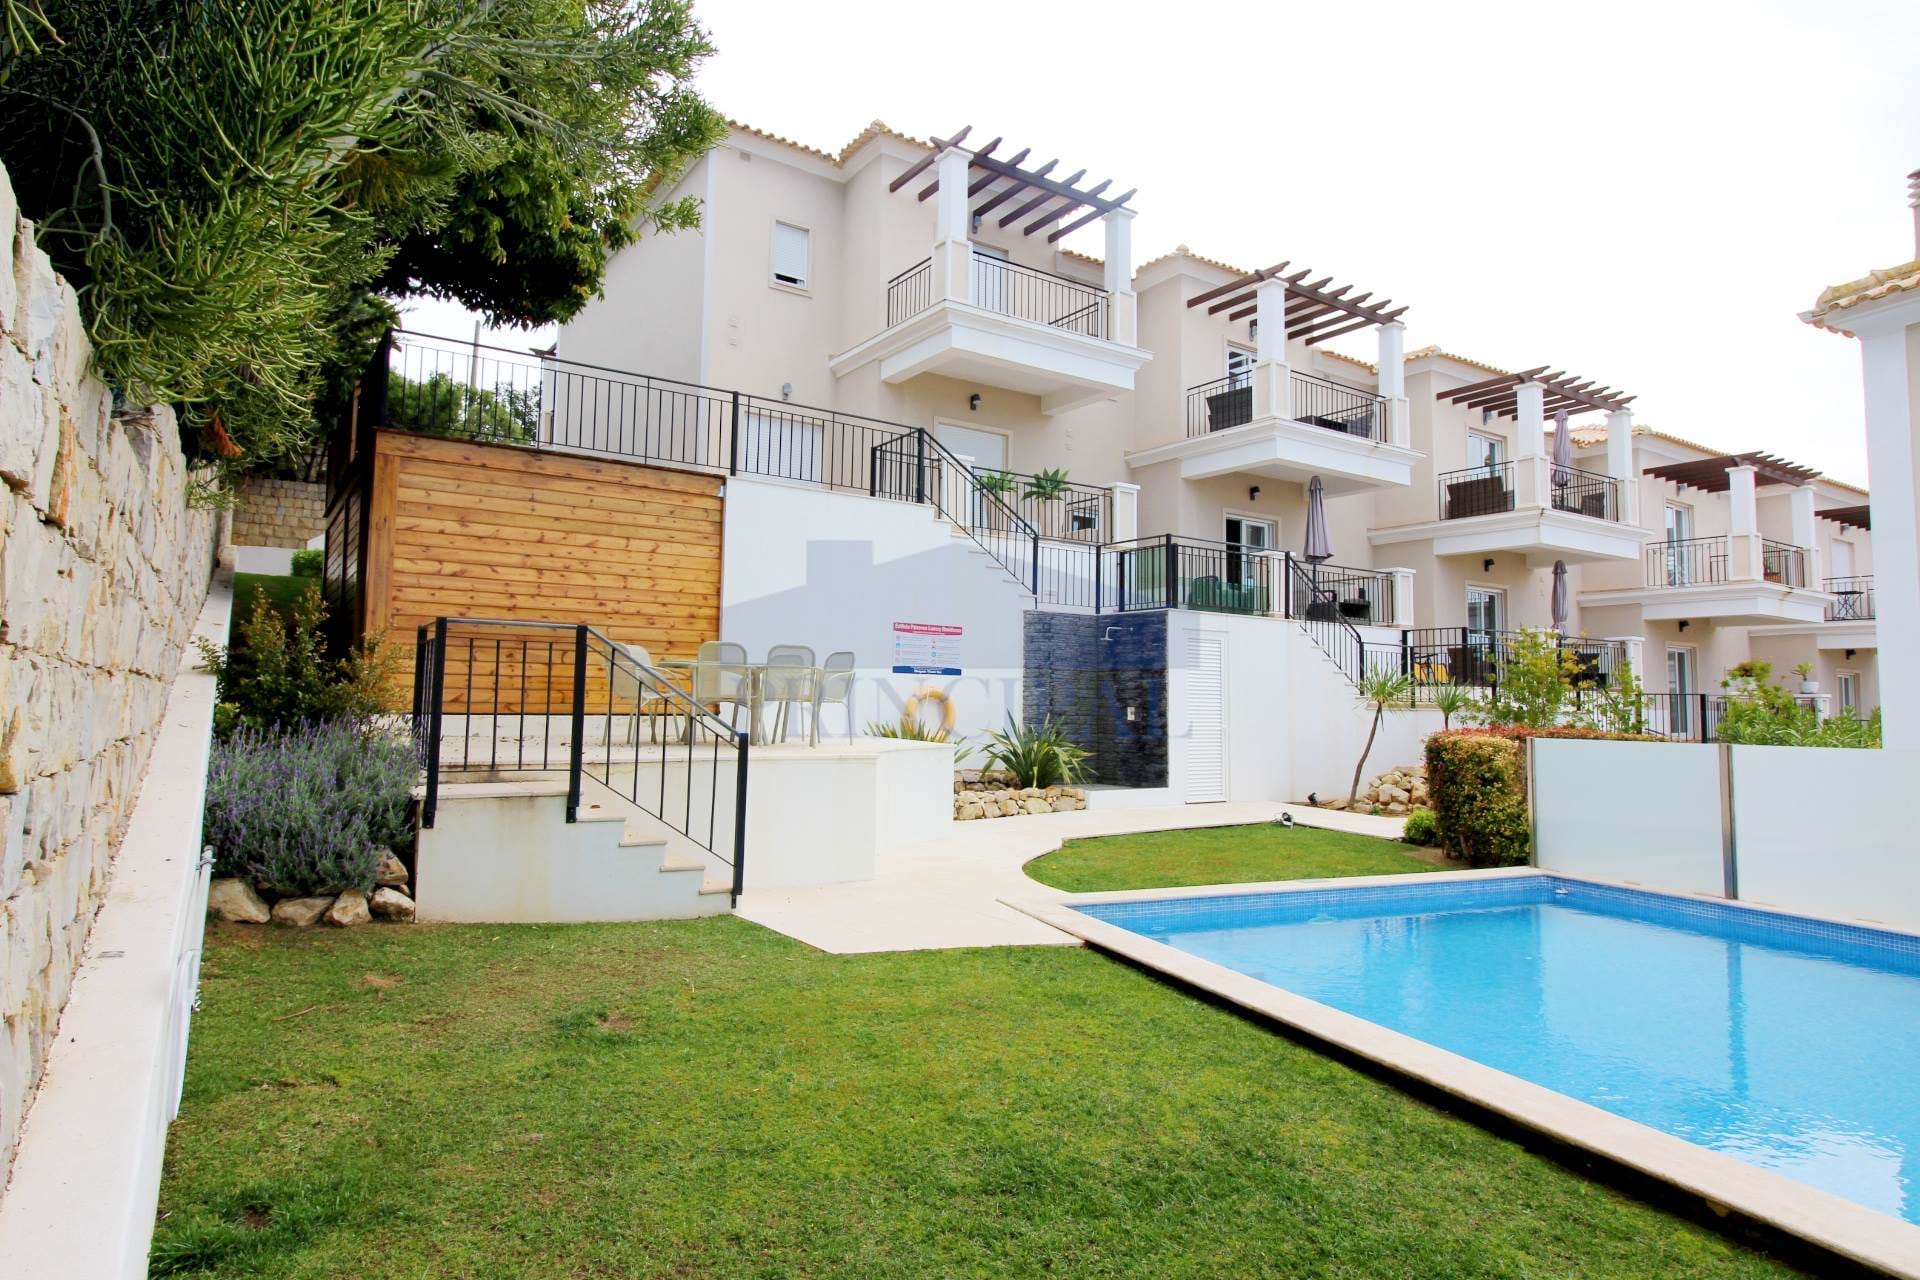 2 Bedroom Townhouse w/ Pool and Sea View in Modern Condominium, Patroves